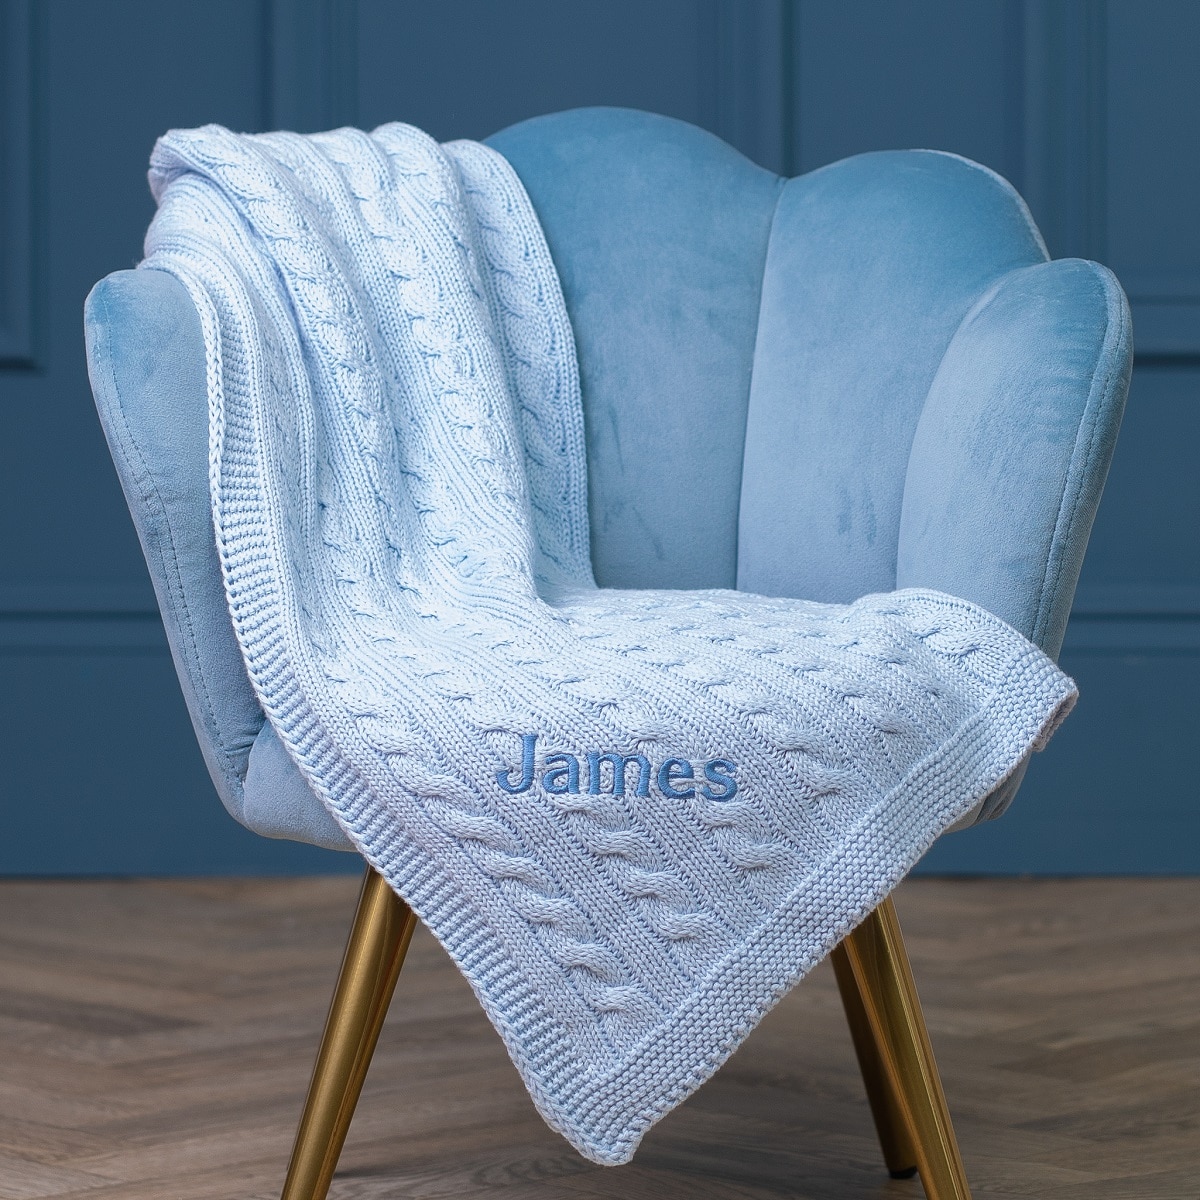 Toffee Moon personalised pale blue luxury cable baby blanket